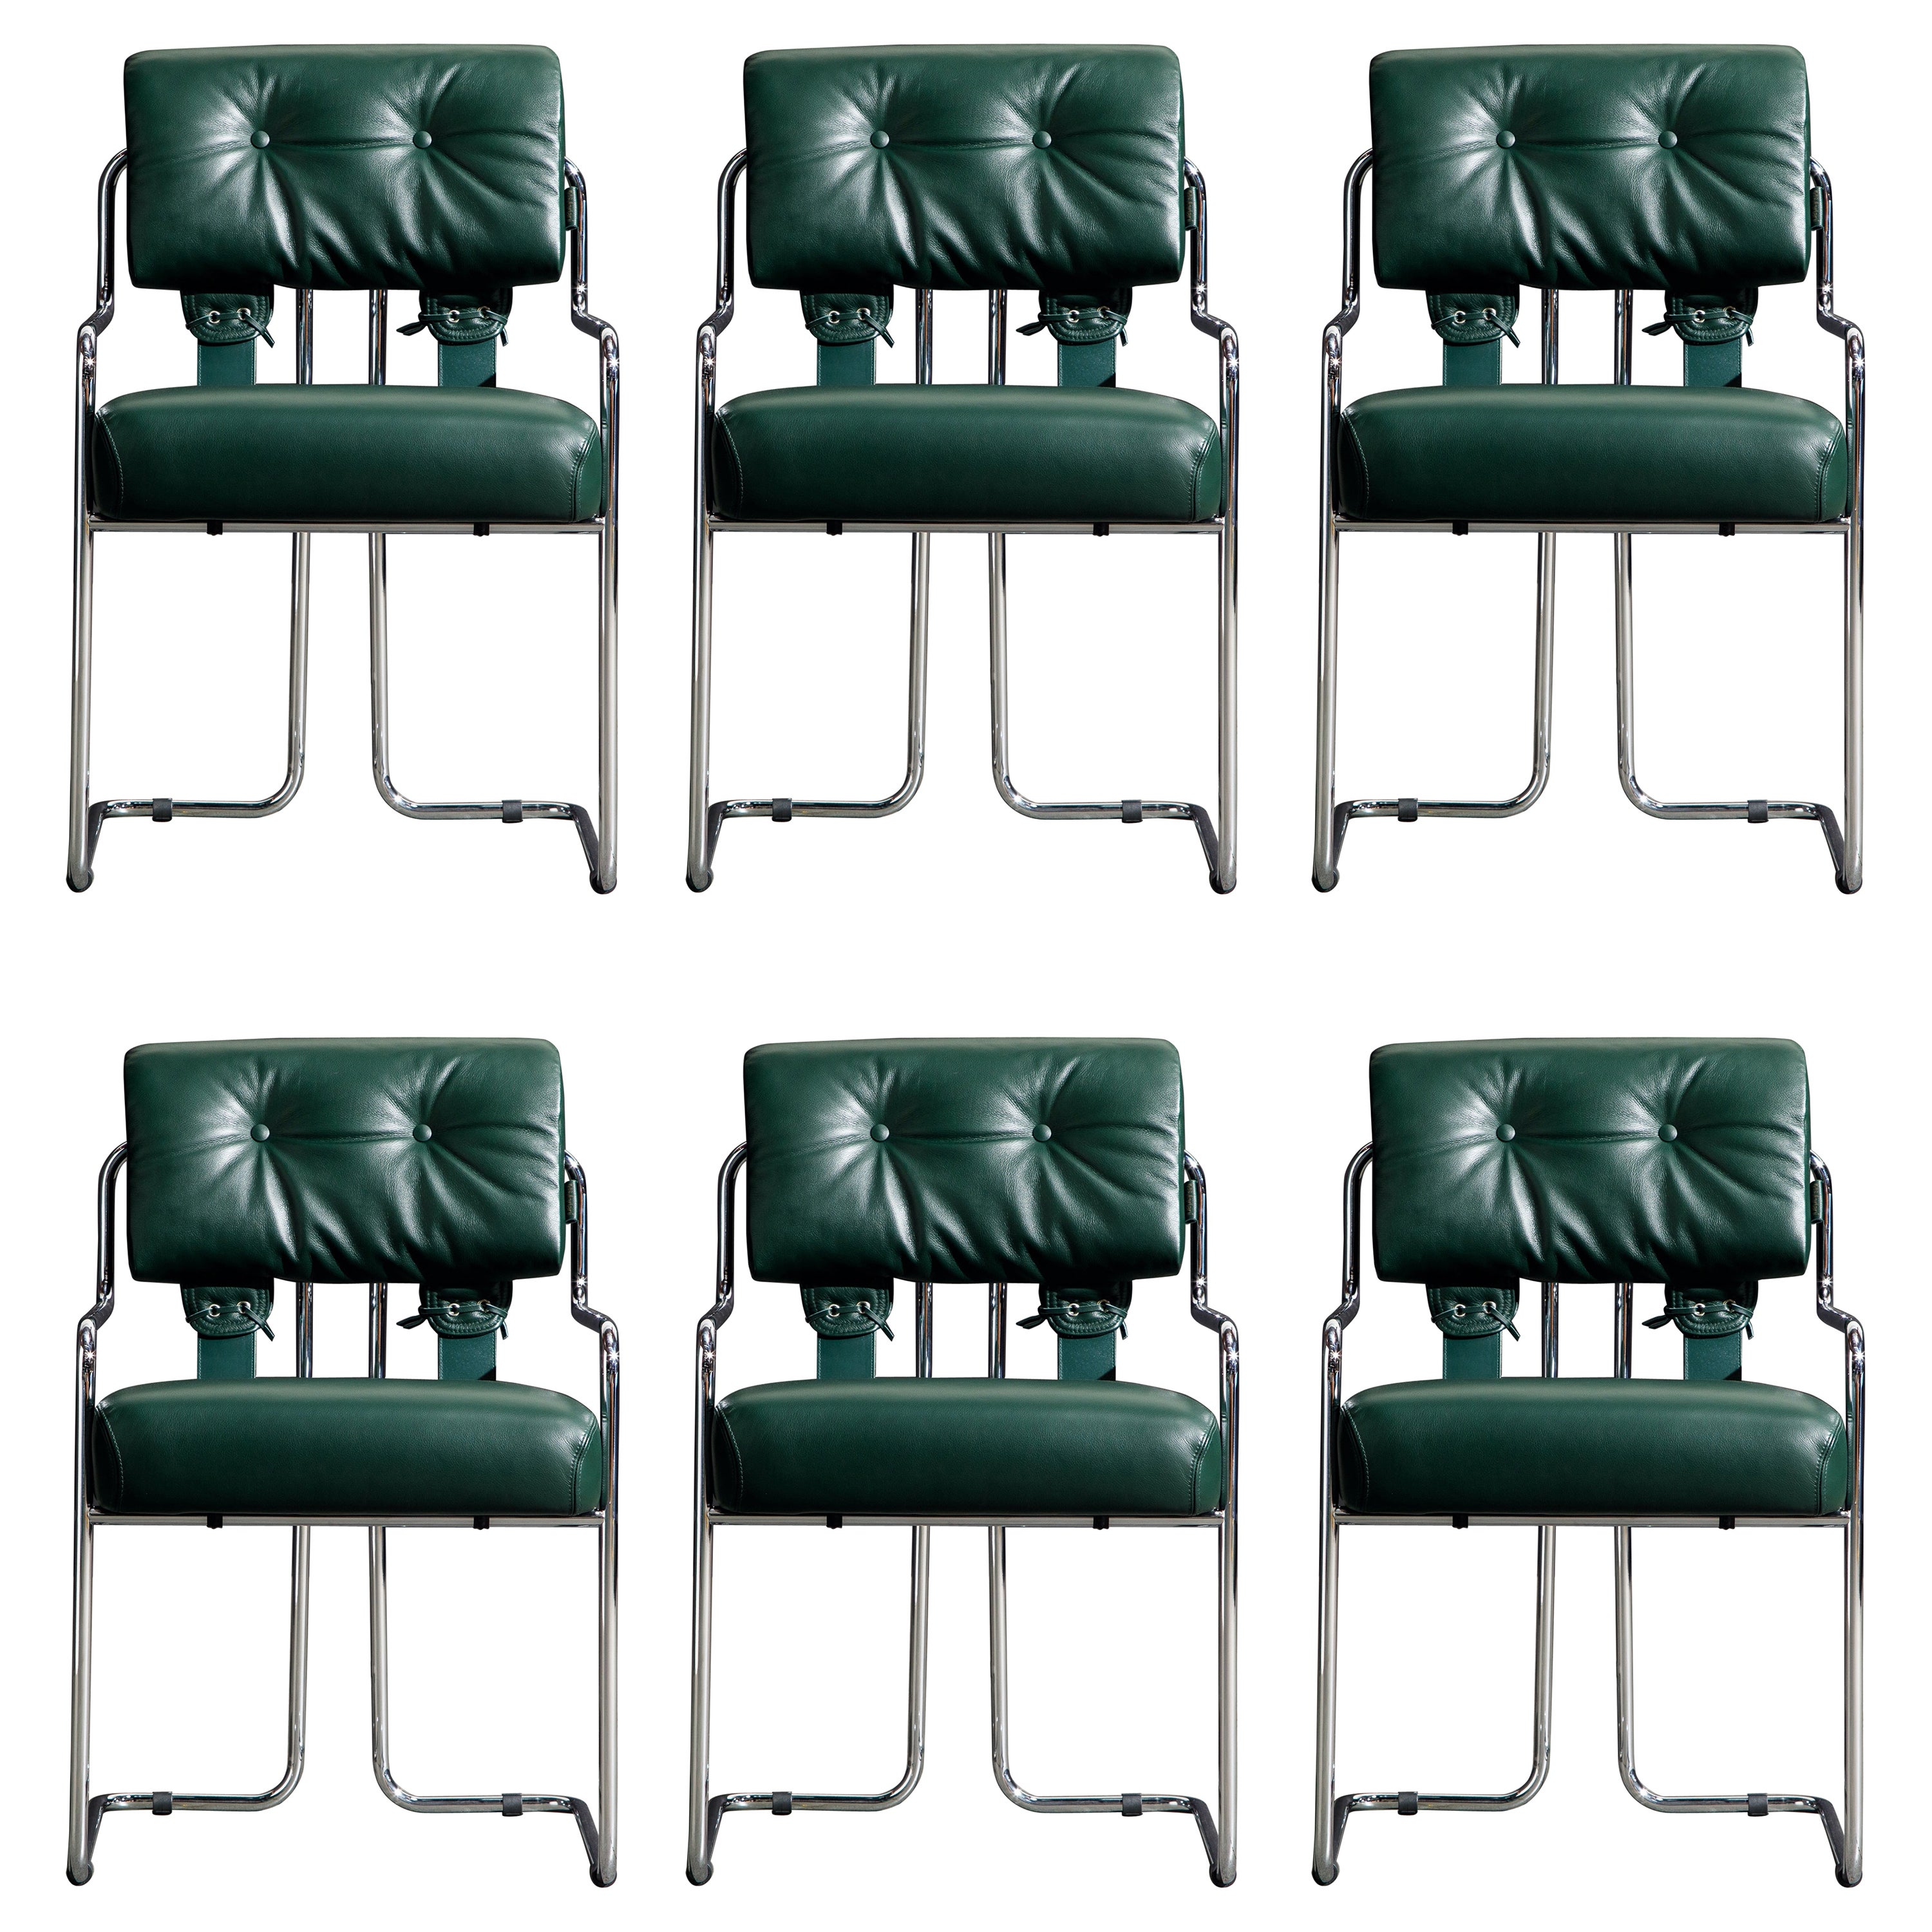 Brand New Emerald Green Leather Tucroma Chairs by Guido Faleschini for Mariani